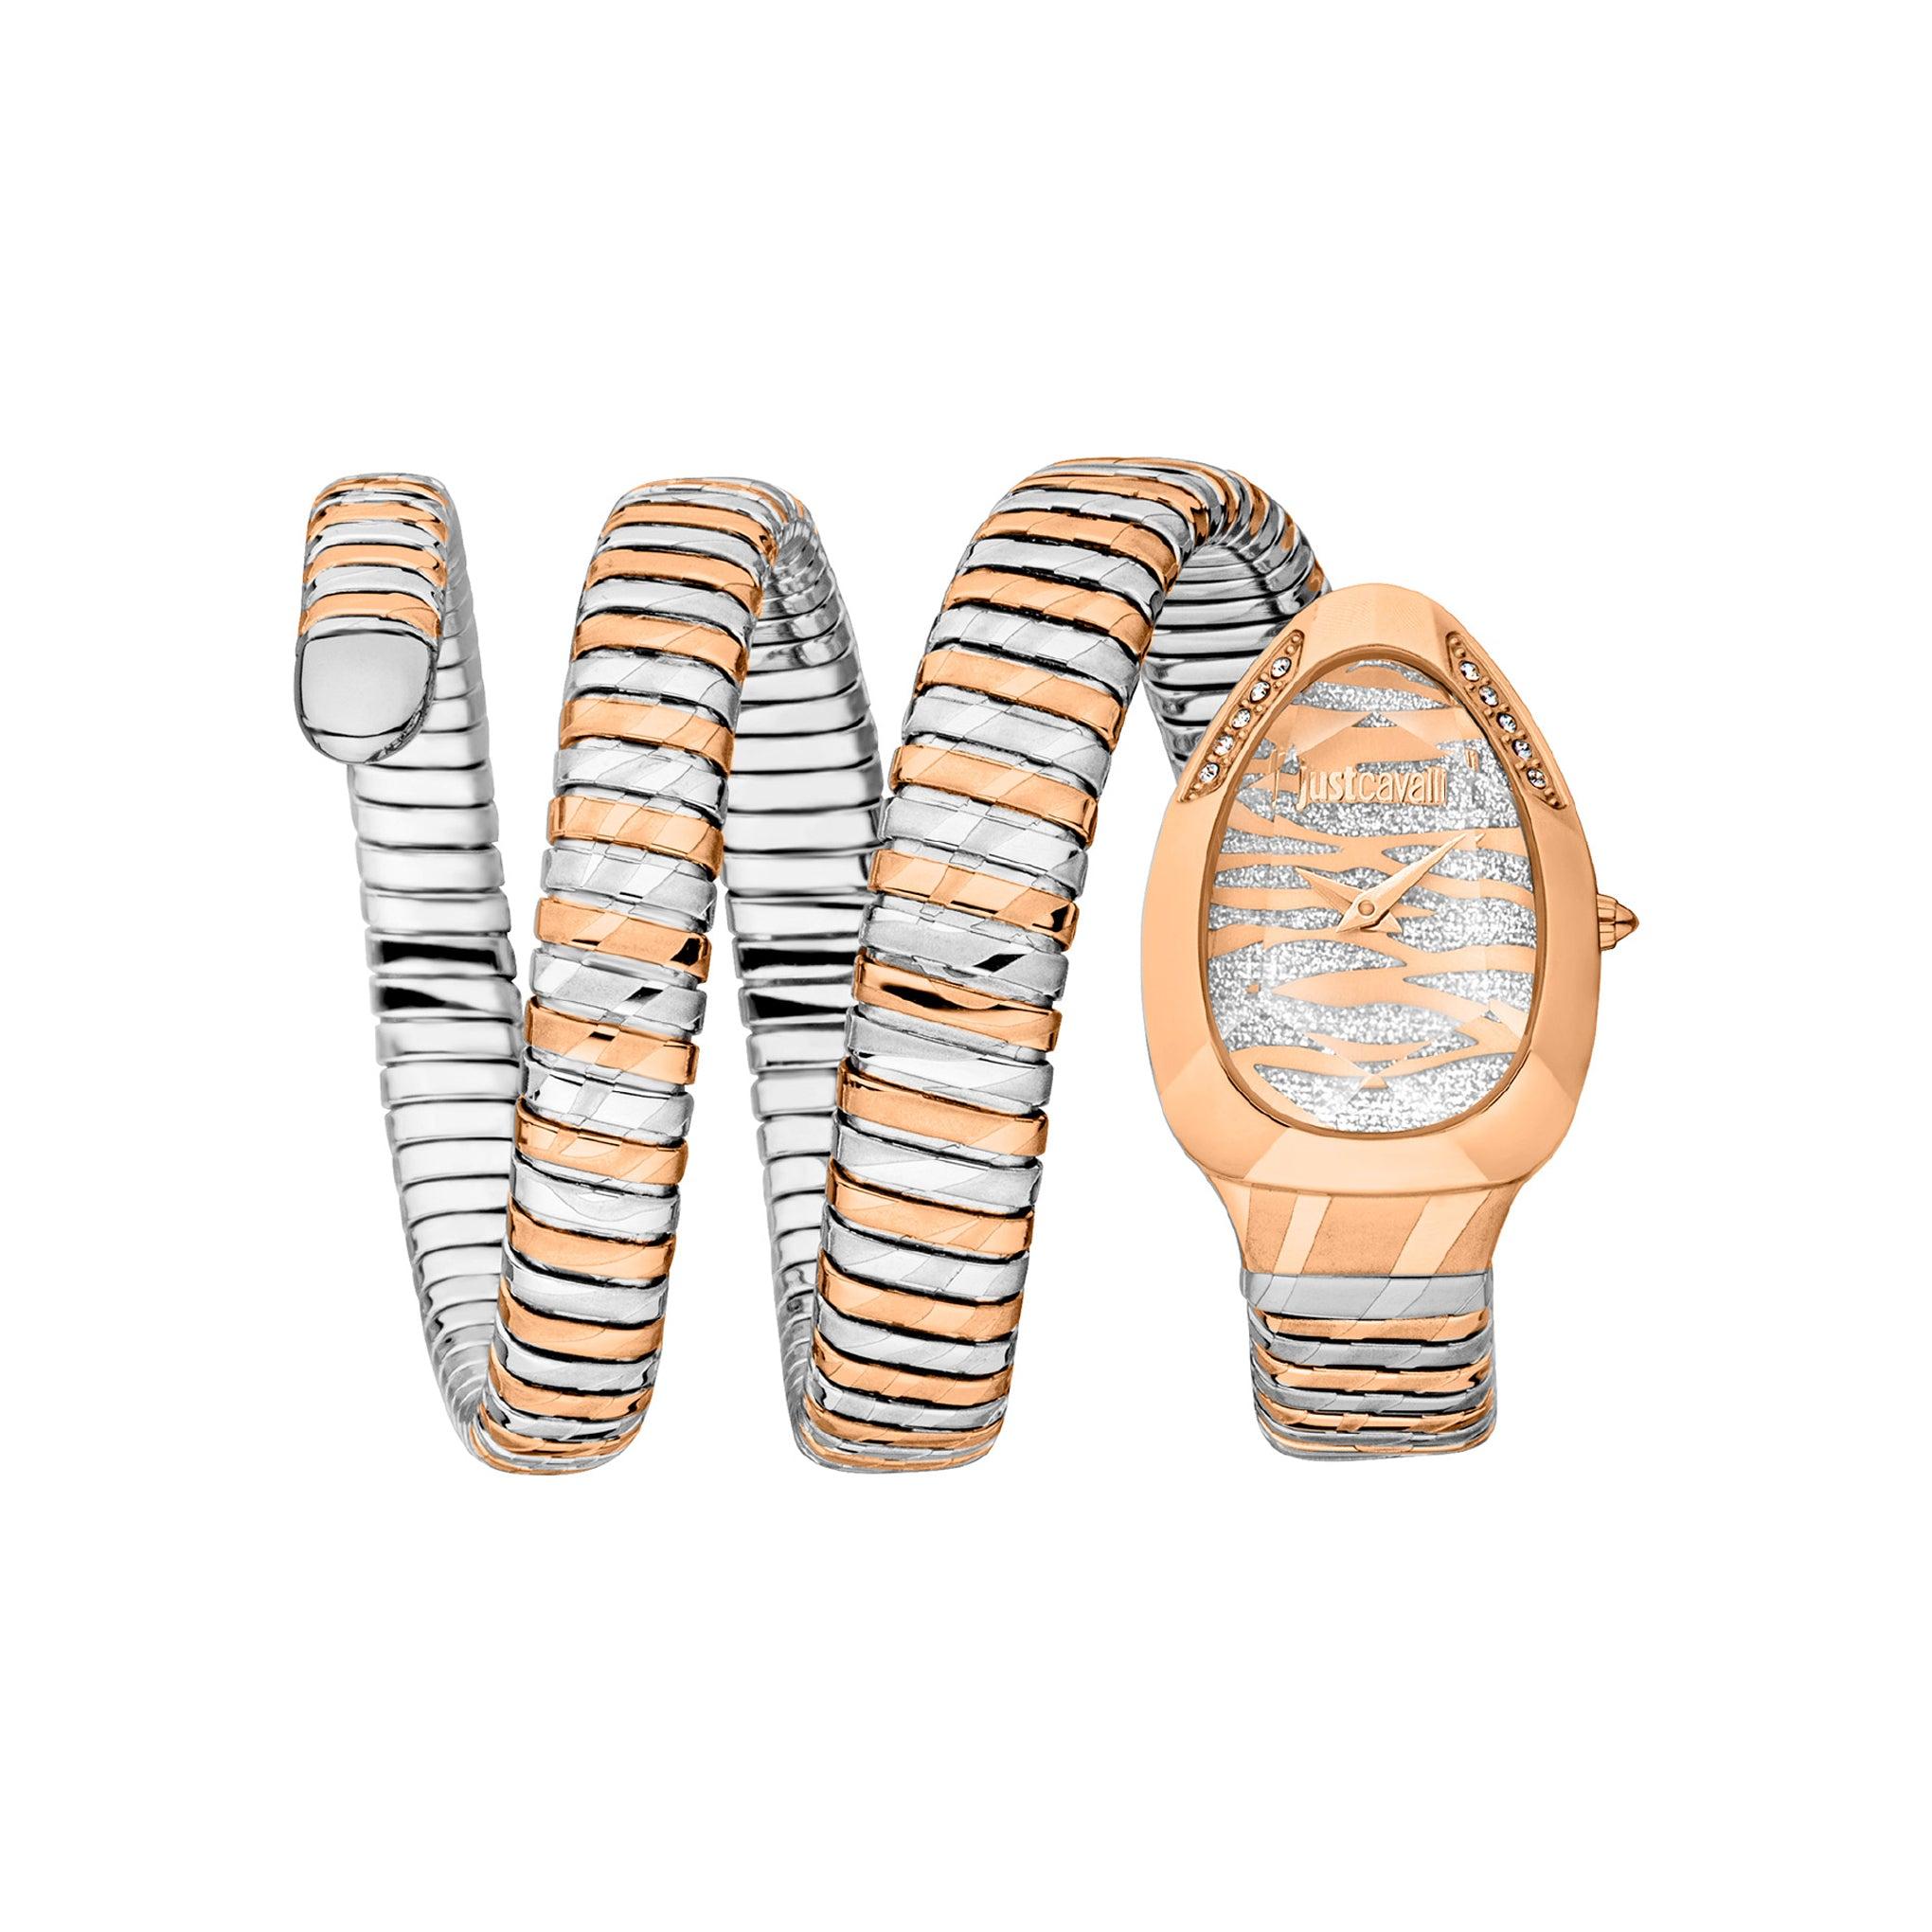 Just Cavalli Serpente Taglio Two Tone Rose Gold Stainless Steel Watch Jc1l226m0065